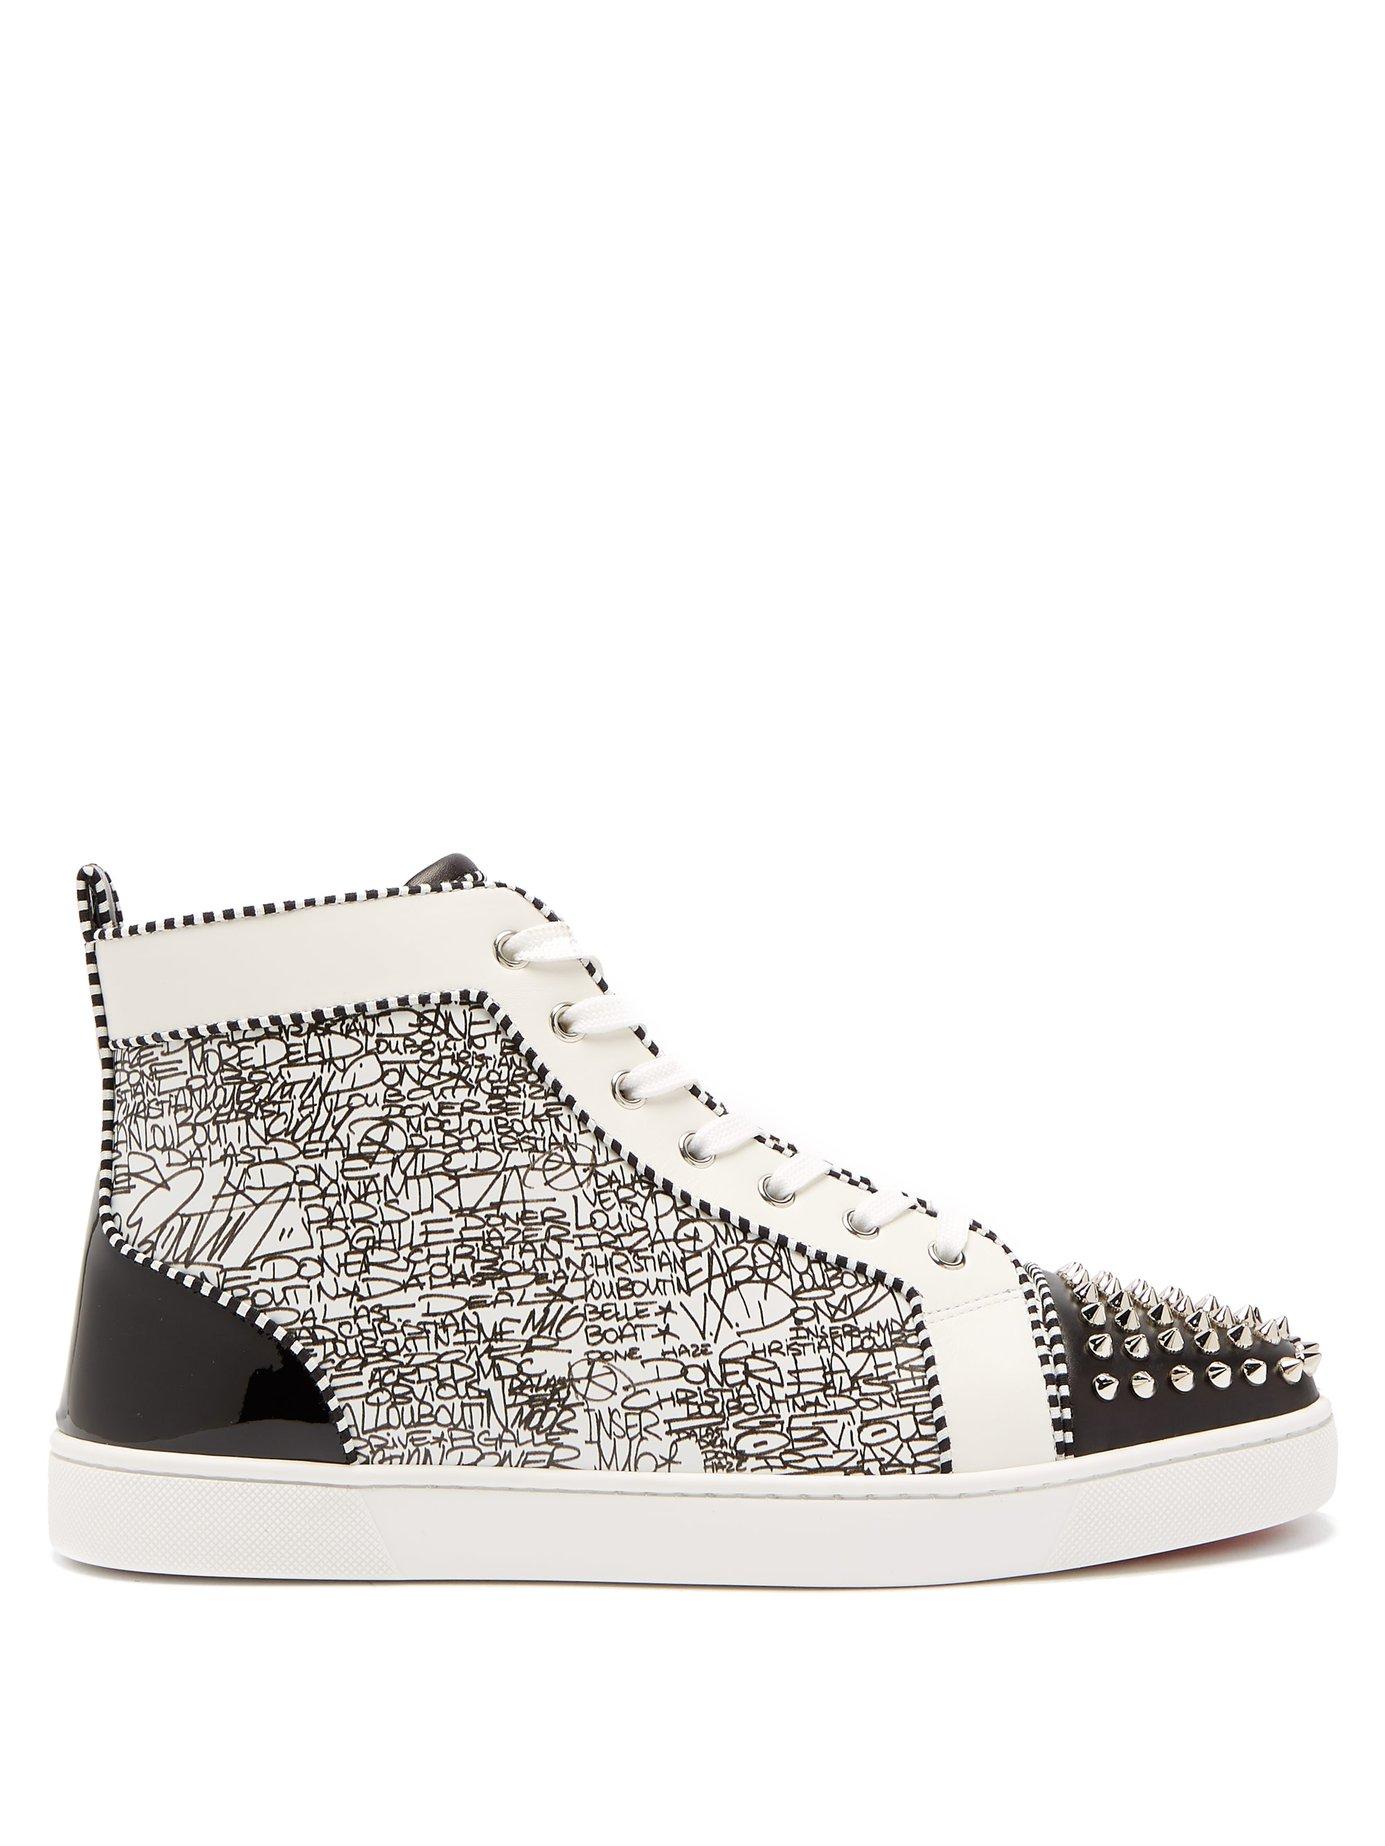 Christian Louboutin Brown Leather Louis Spikes High Top Sneakers